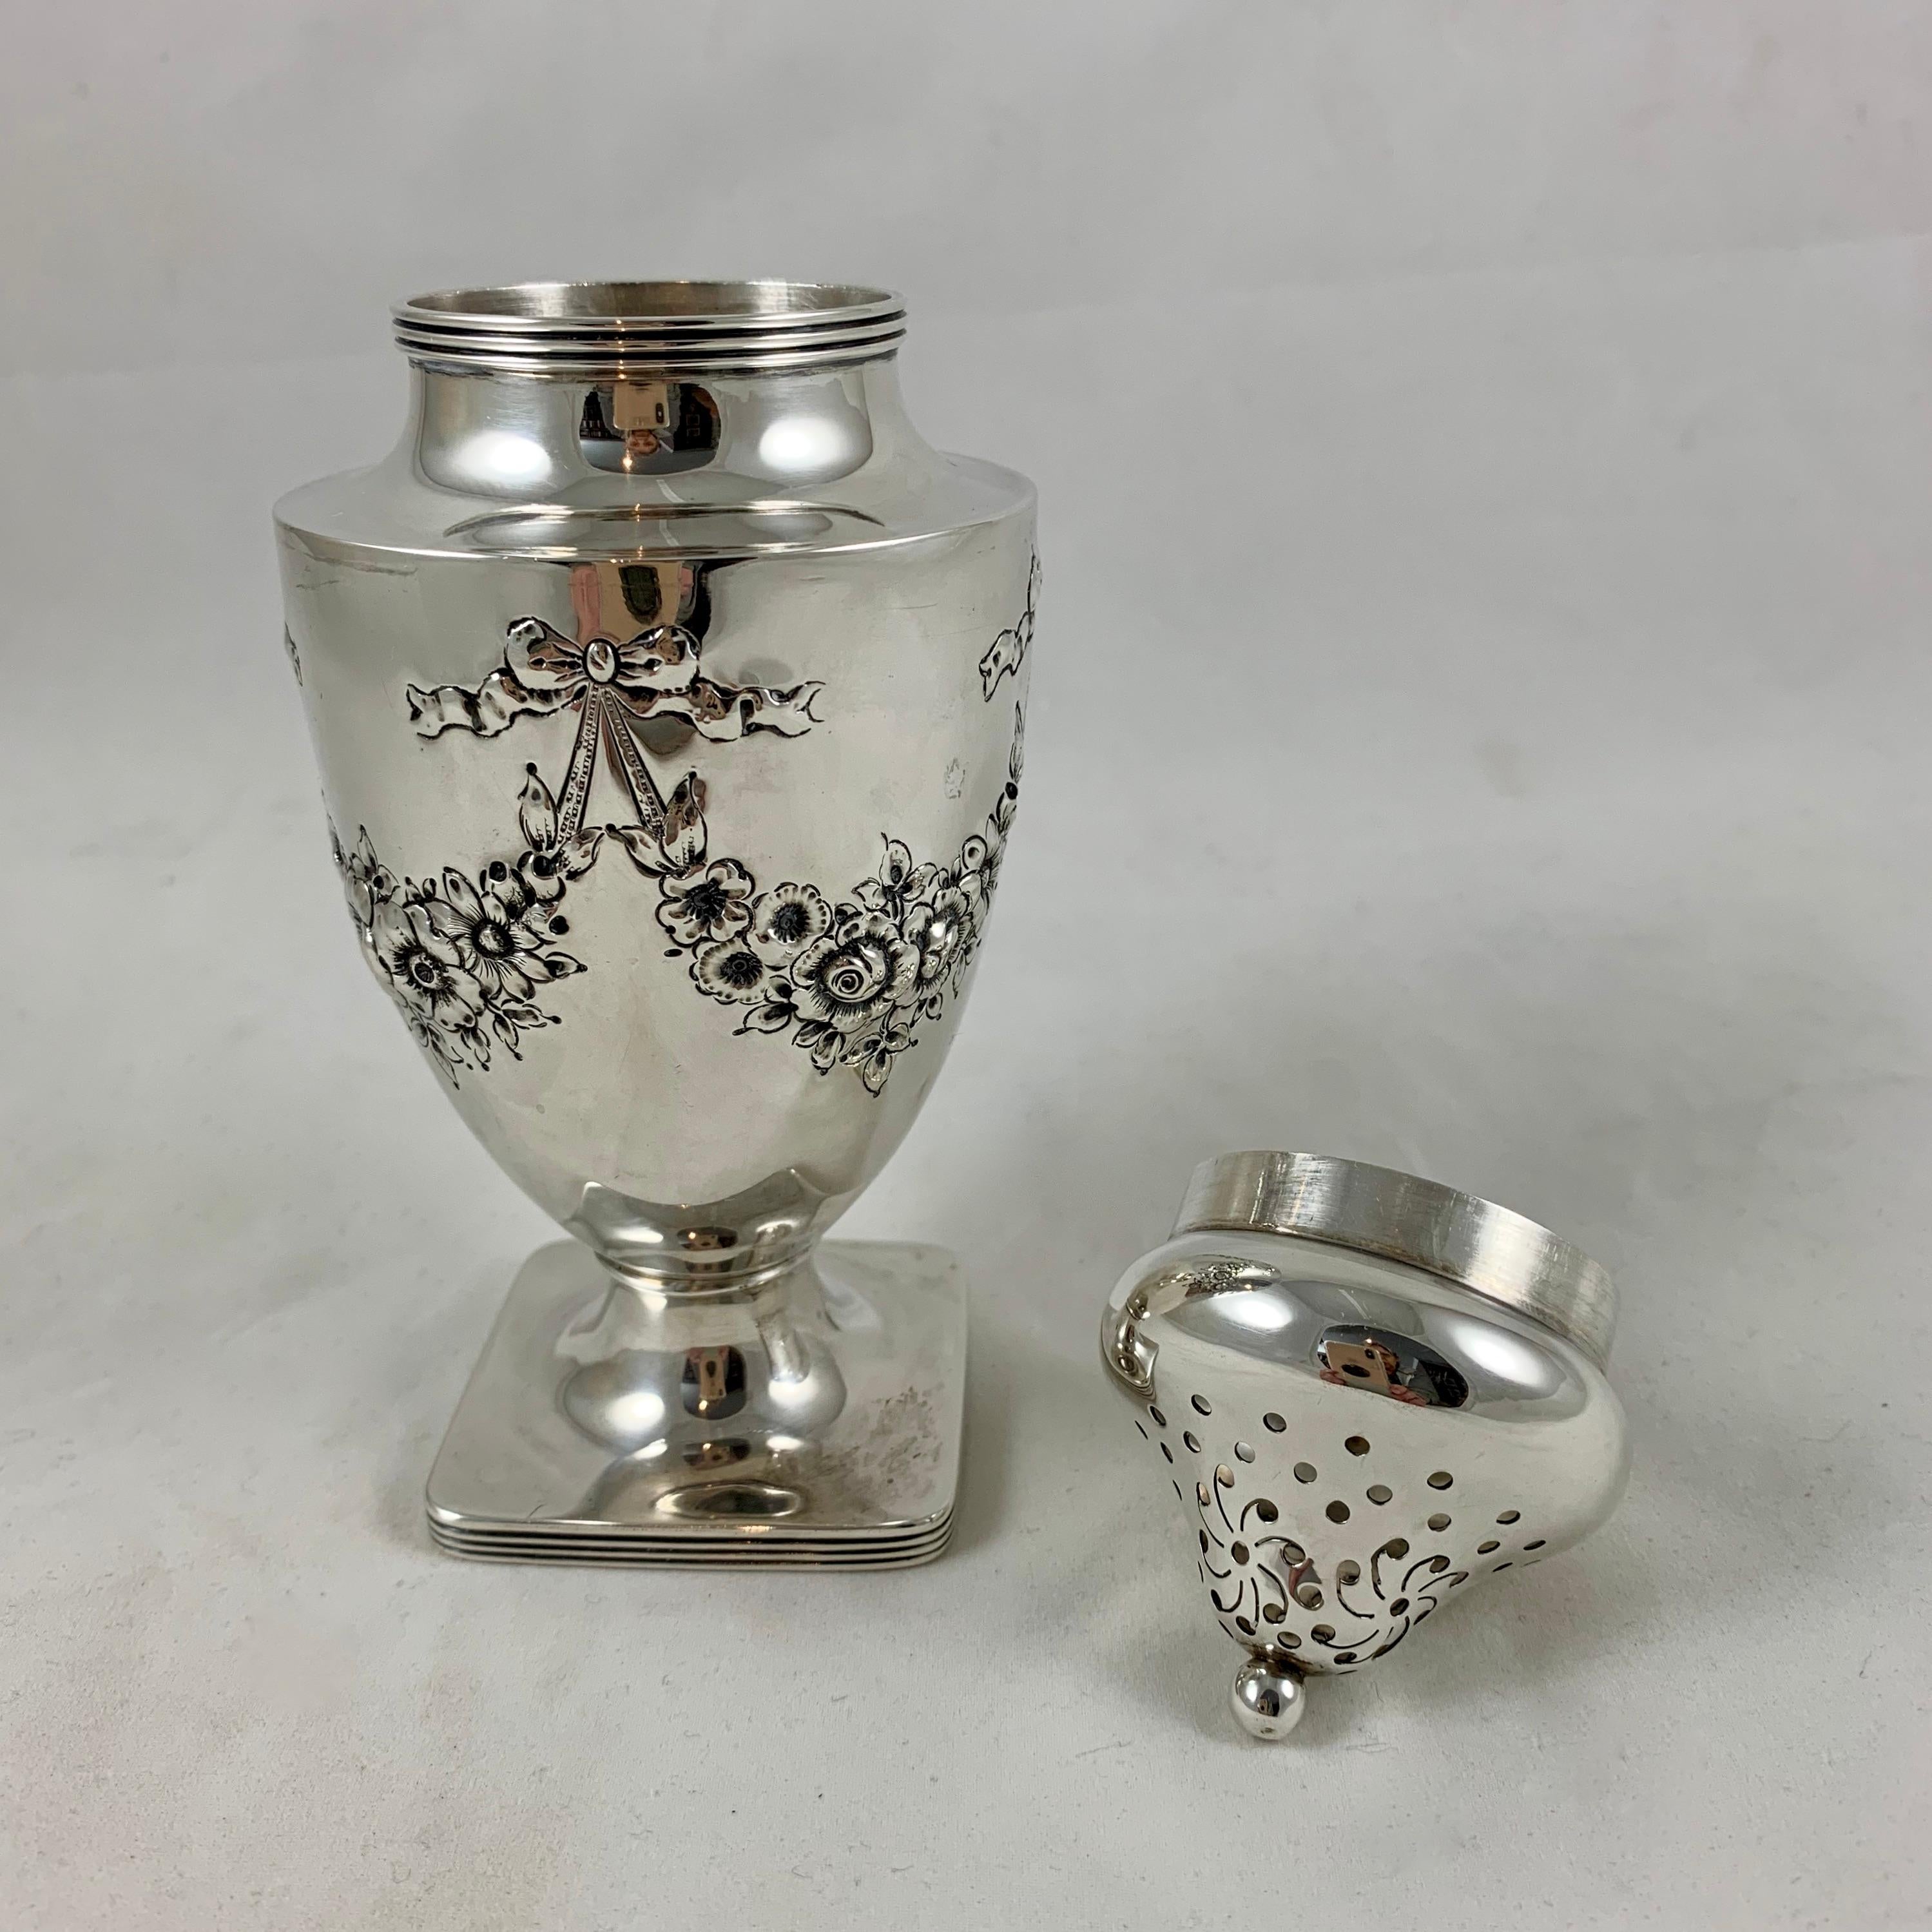 20th Century 19th Century American Lebkuechar & Co. Sterling Silver Floral & Bow Sugar Caster